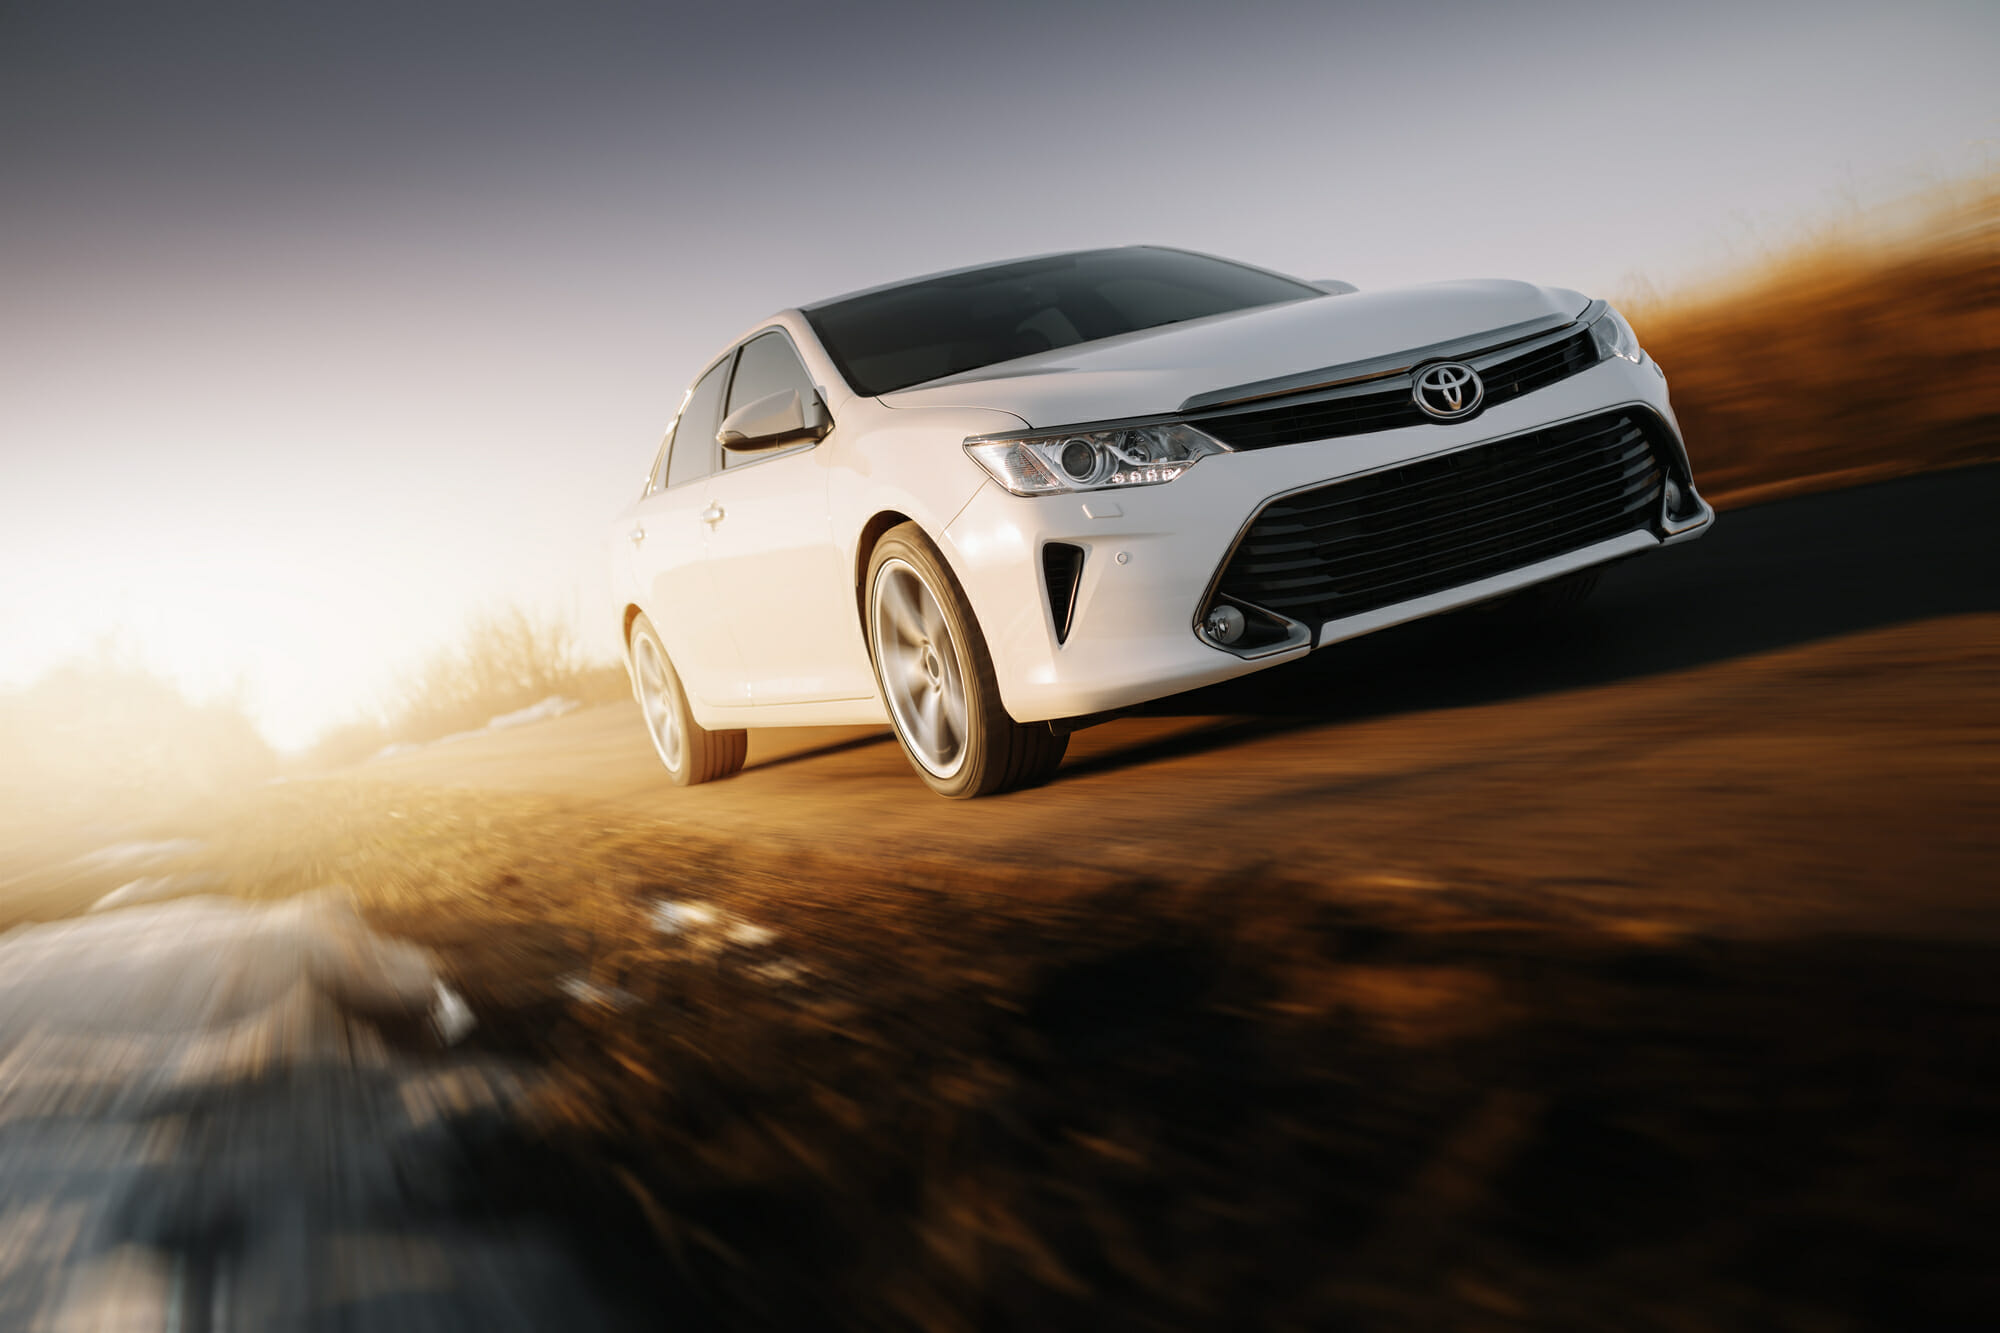 White Toyota Camry in motion with sunrise background